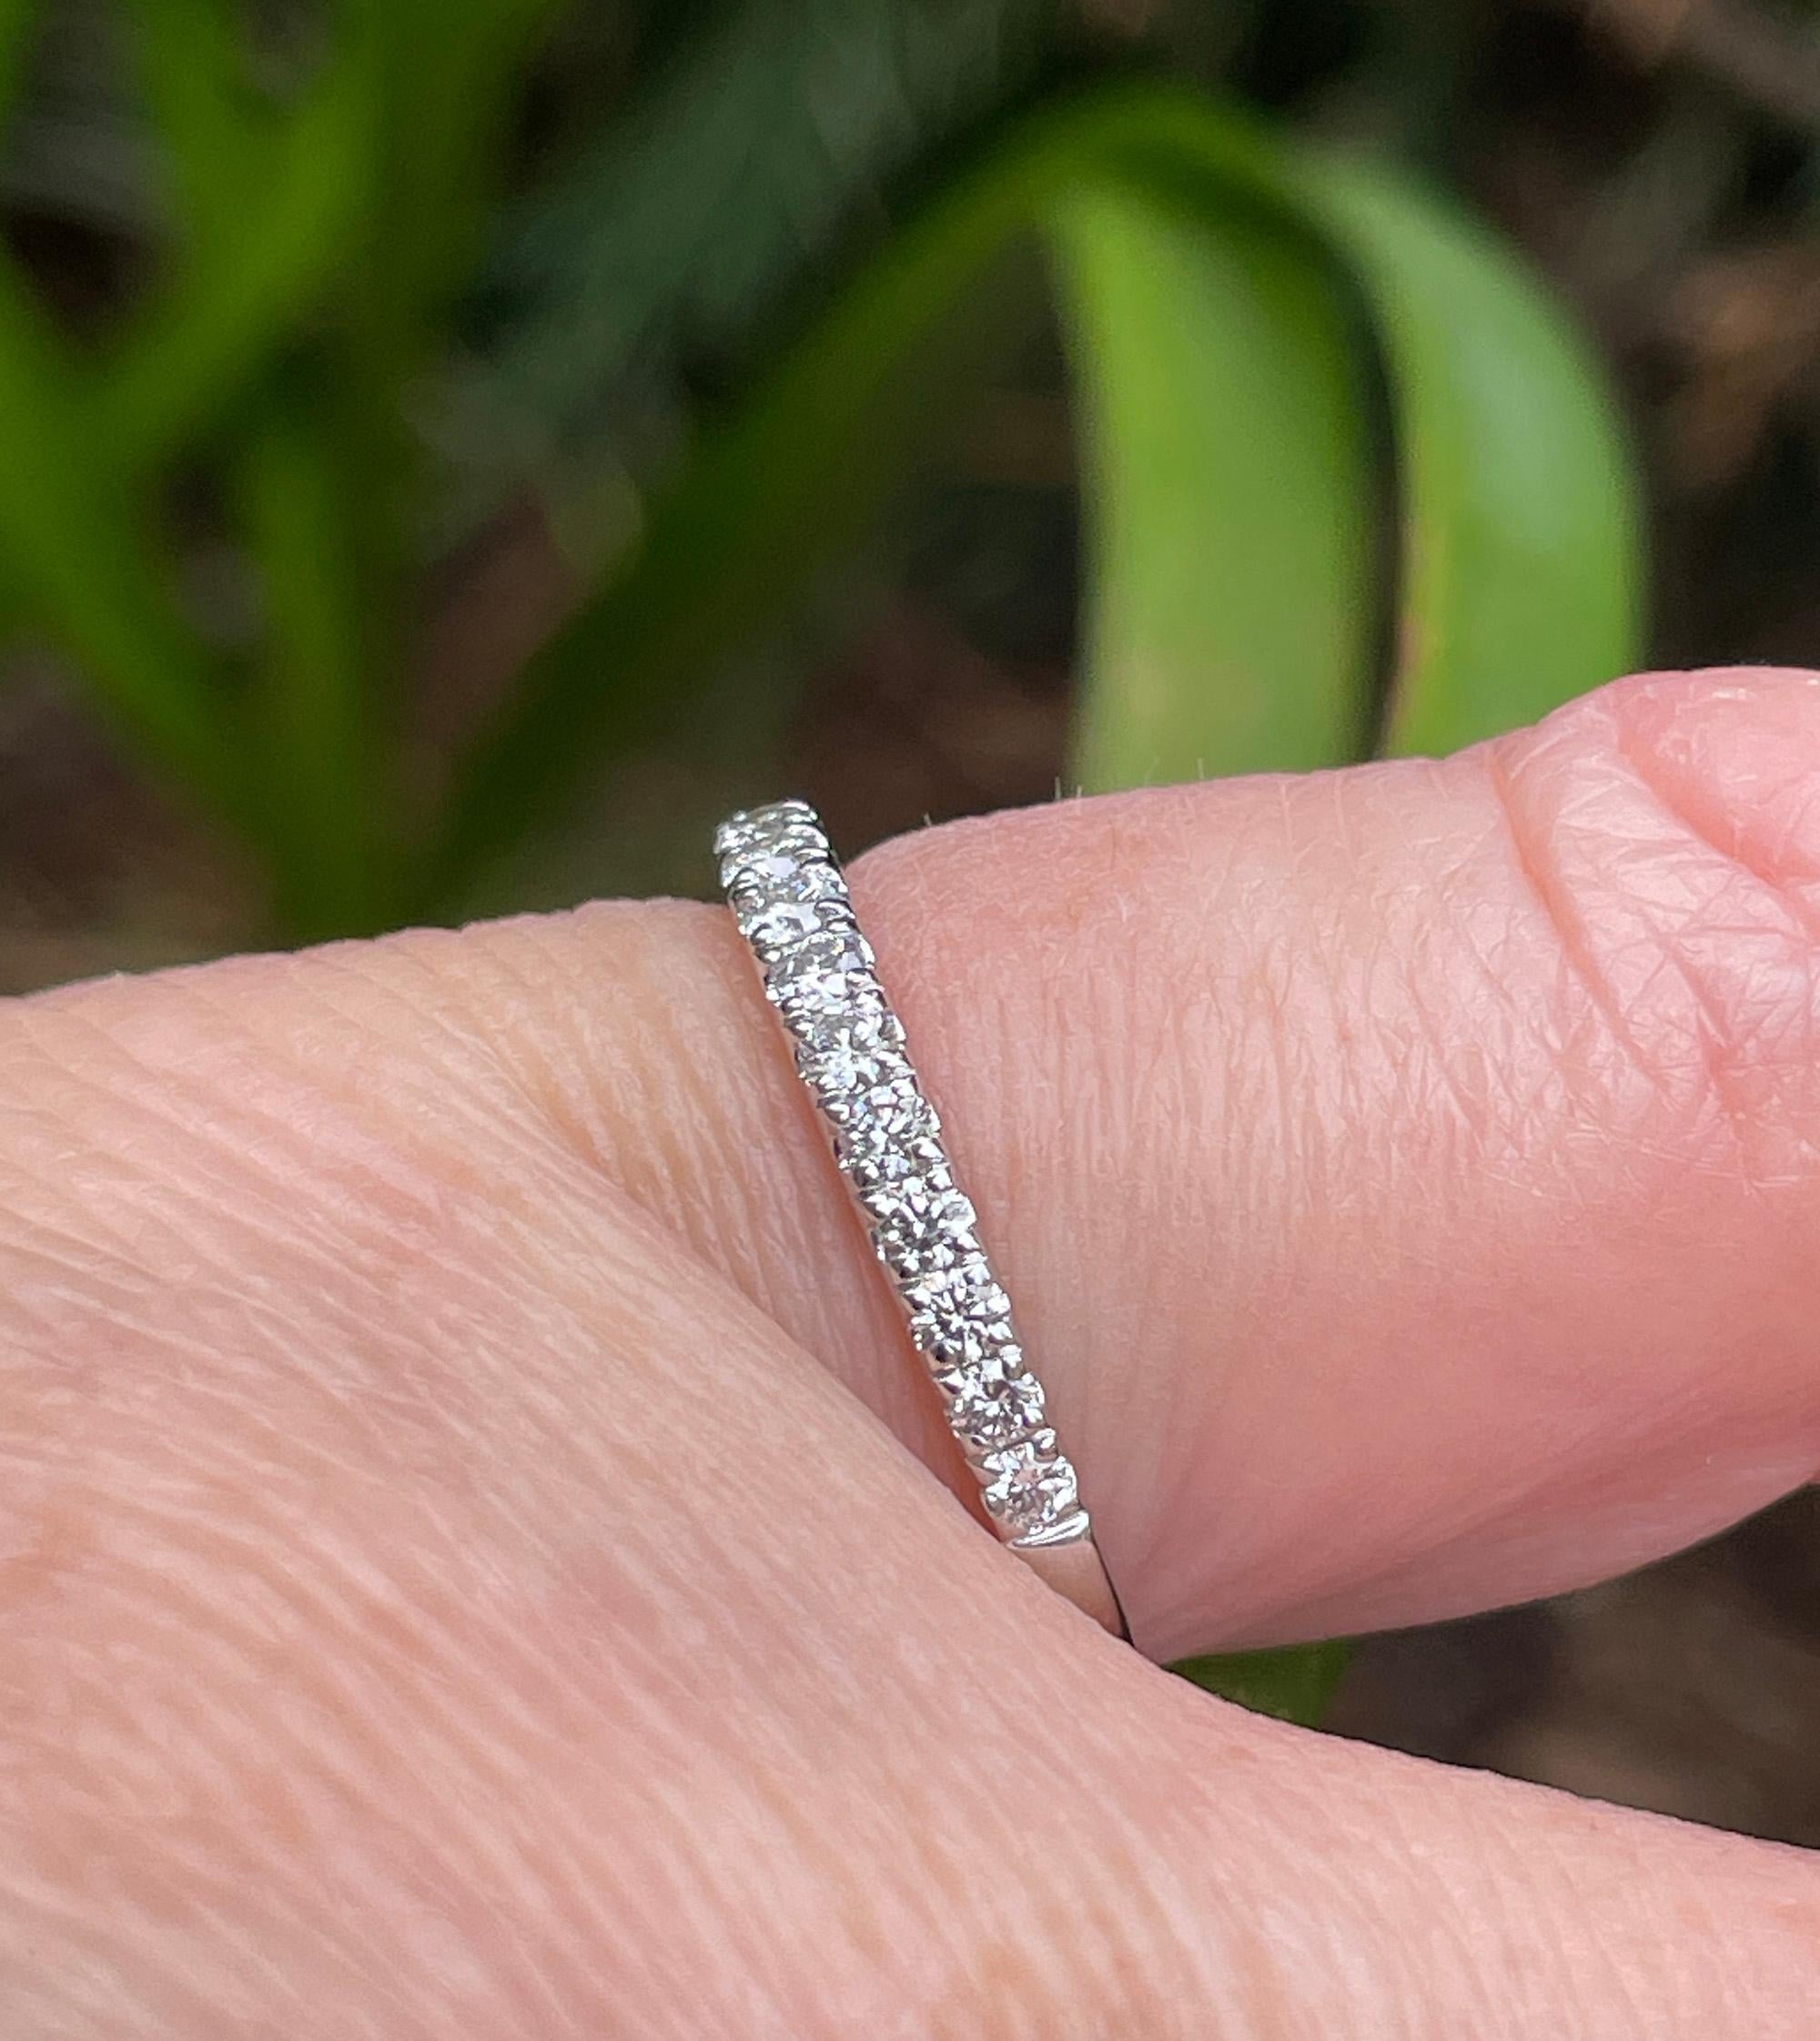 Diamond Wedding Band .55ct Round Diamonds Pave 14k White Gold Ring Stackable Anniversary Band
A GORGEOUS, Delicate thread of scalloped pavé set diamonds encircles the finger in this exceptionally thin diamond ring. It is the perfect complement to